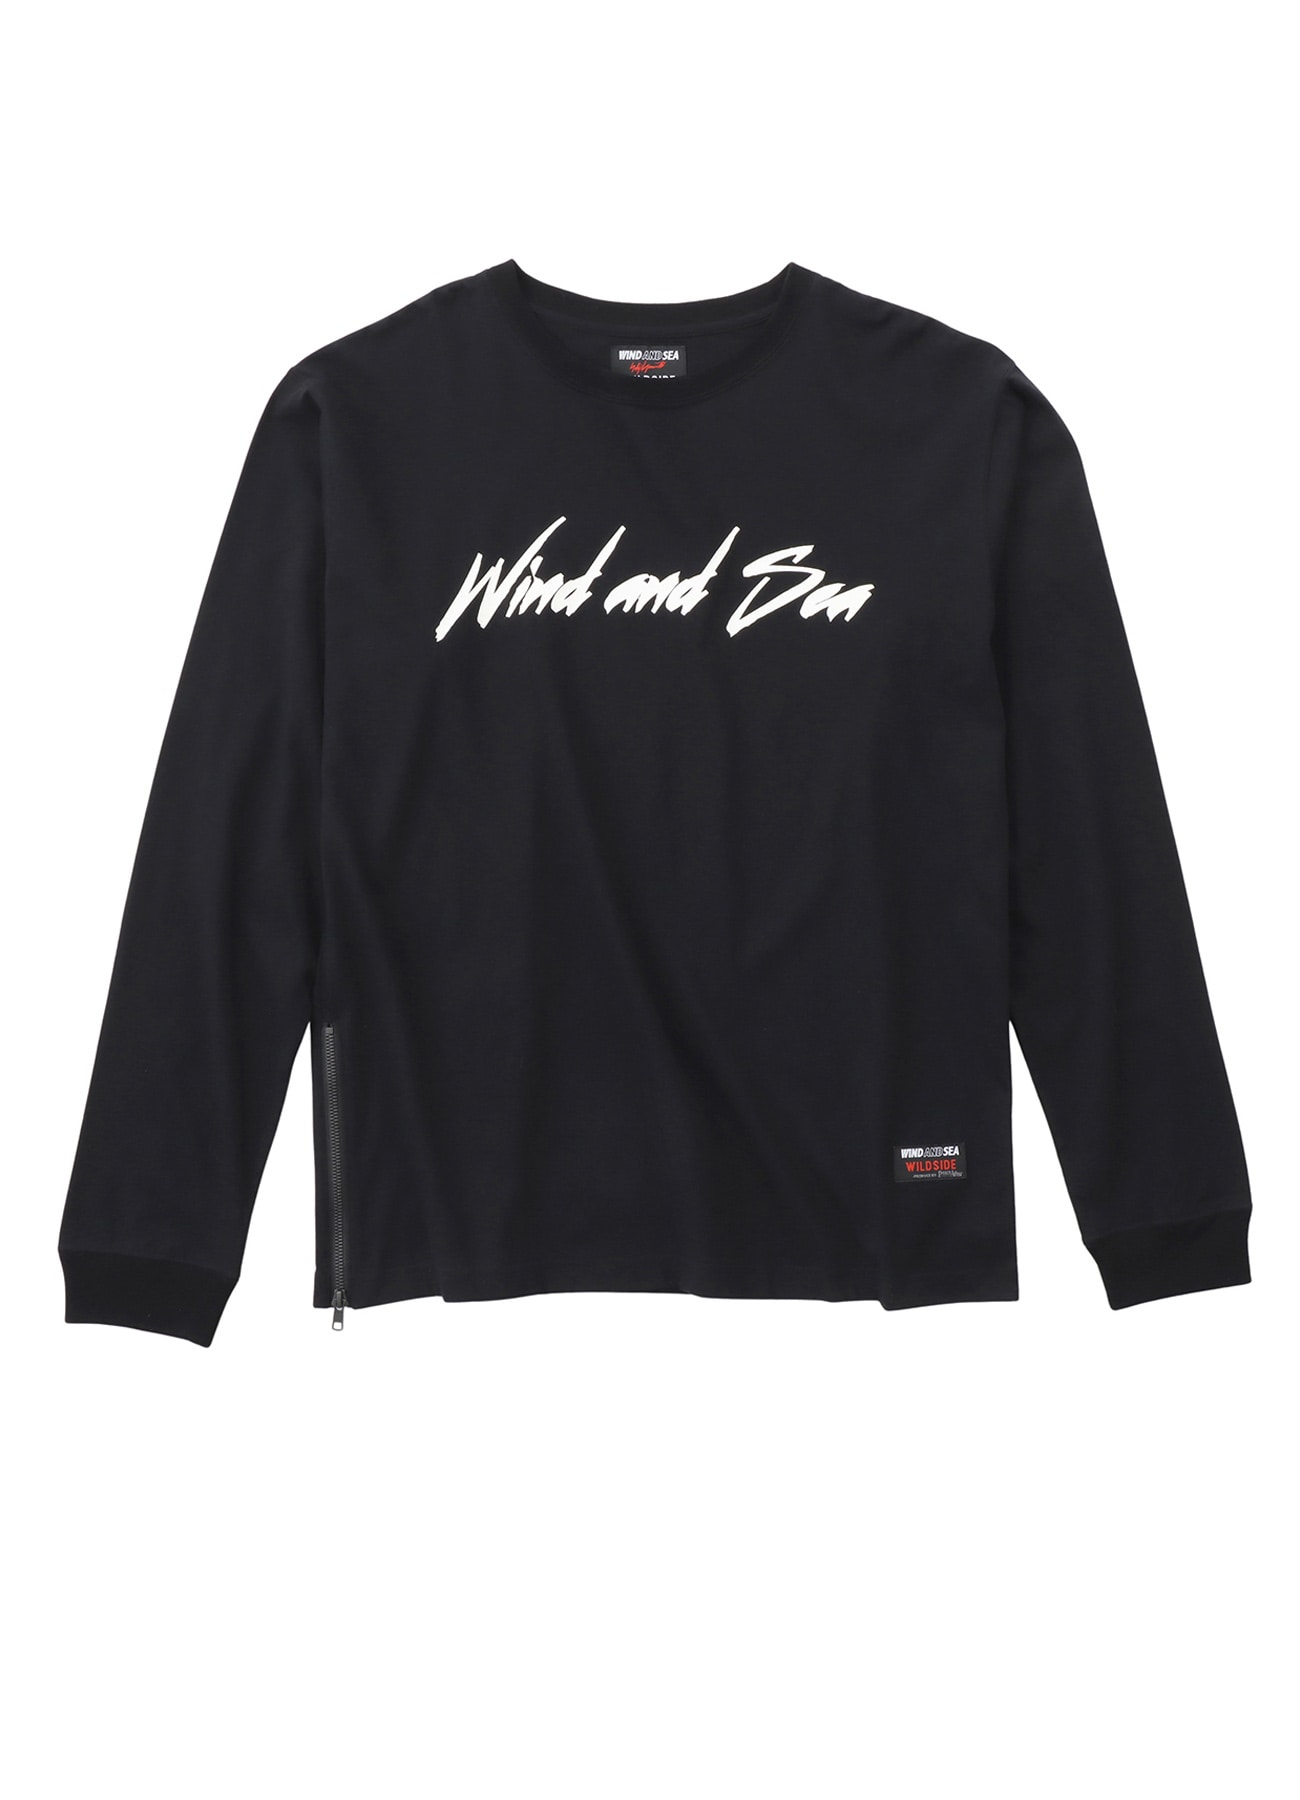 WIND AND SEA Metal L/S T Shirt \